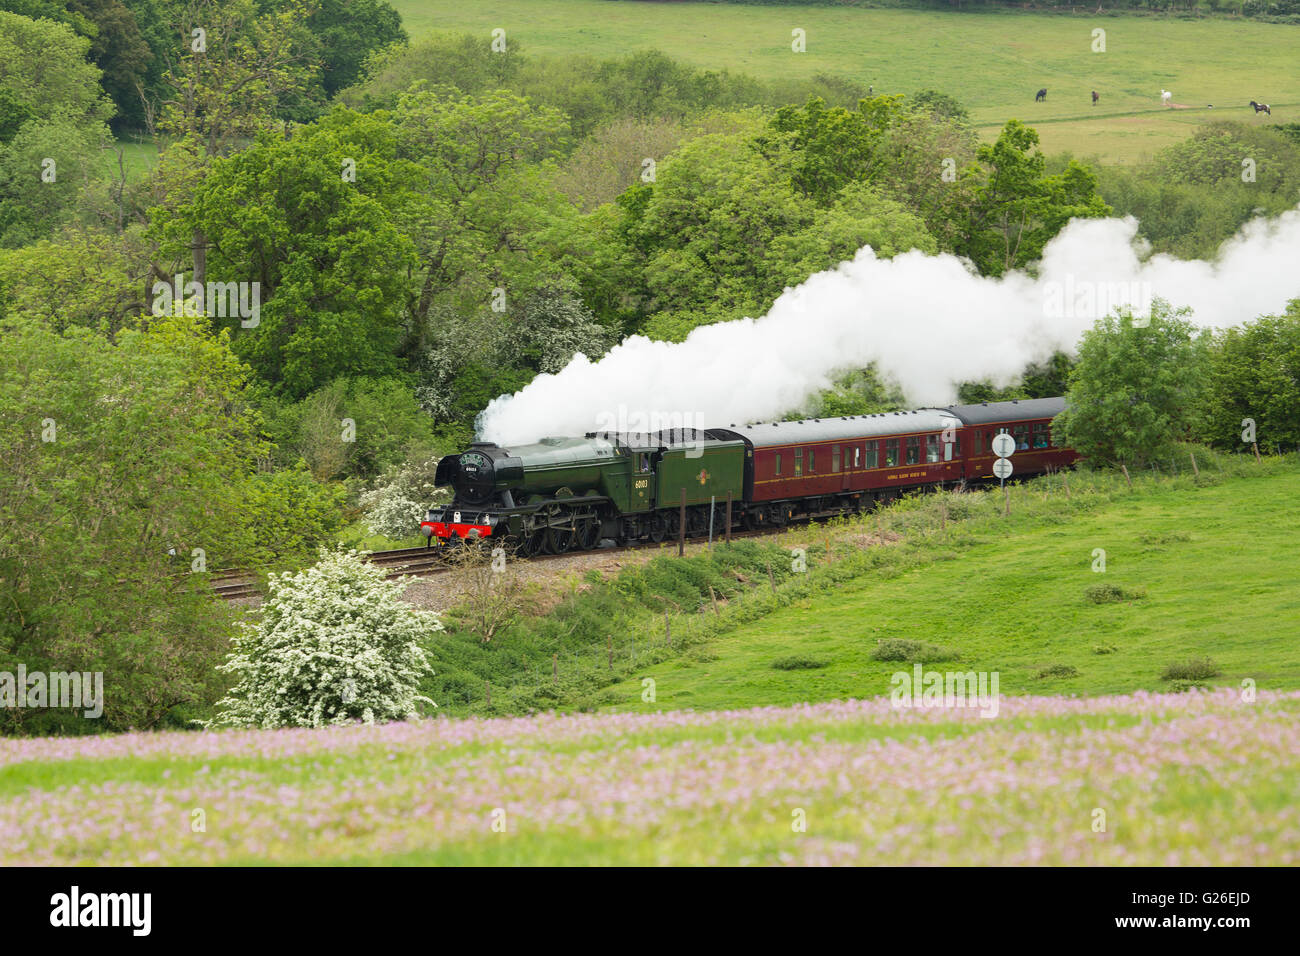 Surrey, UK. 25th May, 2016. The steam locomotive Flying Scotsman seen today on its first excursion in to the Surrey Hills since returning to service earlier this year. Stock Photo